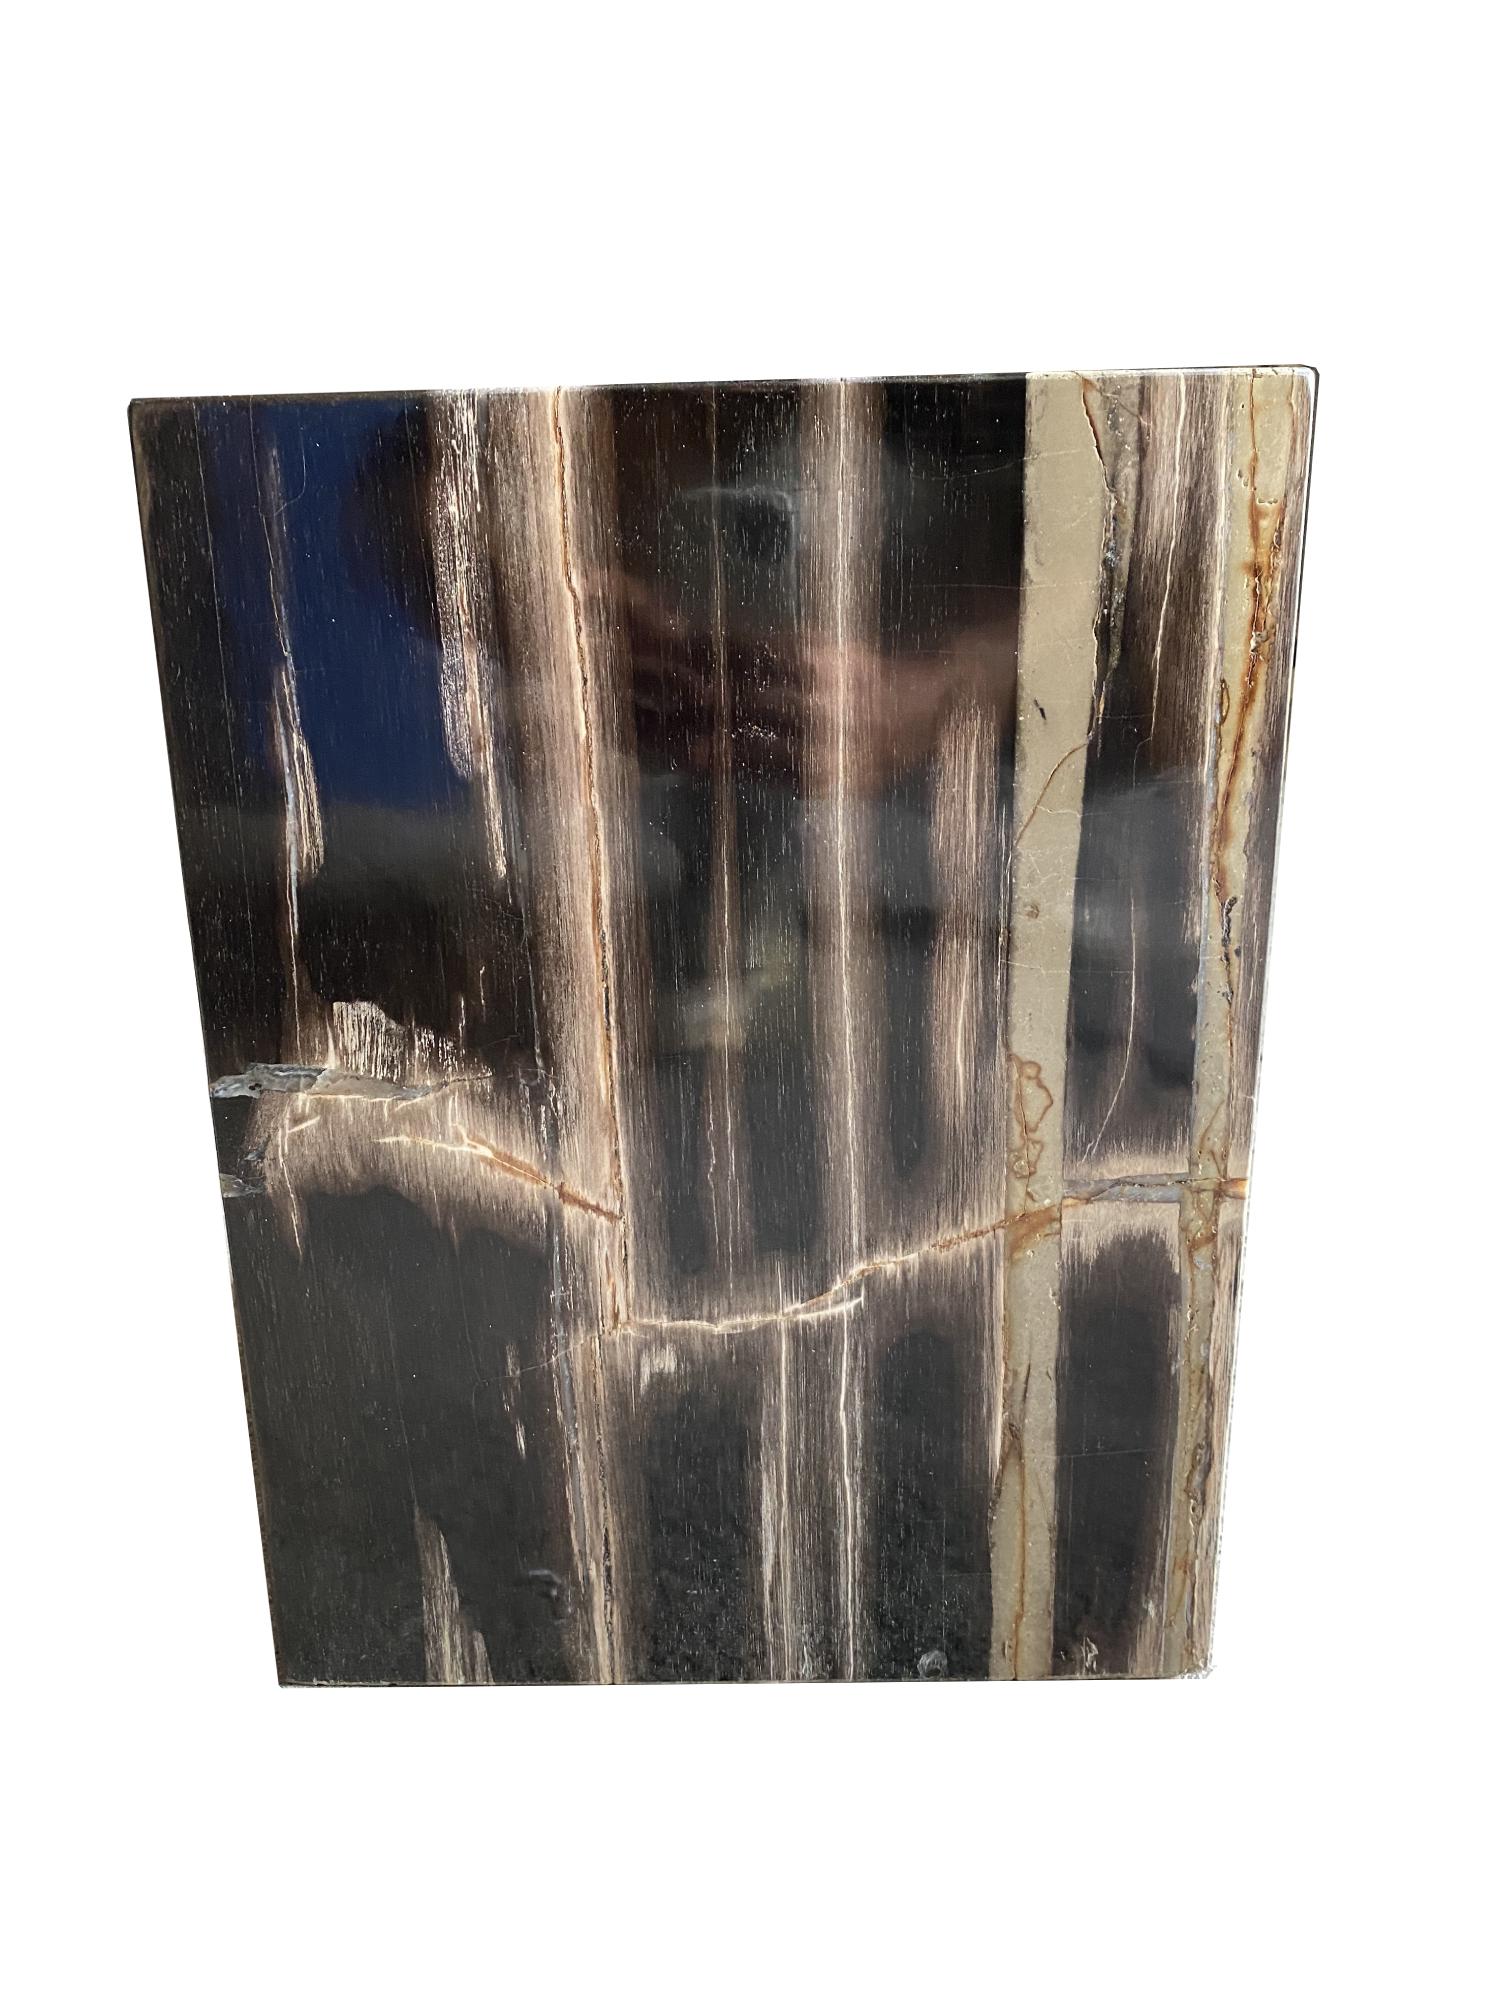 Parallelepiped wood by DeepWood
One of a Kind
Dimensions: L 30 W 30 H 40 cm
Materials: Petrified wood fully polished, steel legs
Wight: 70 kg

Each DeepWood piece is expertly crafted from a rarefied specimen of petrified wood and contains 25